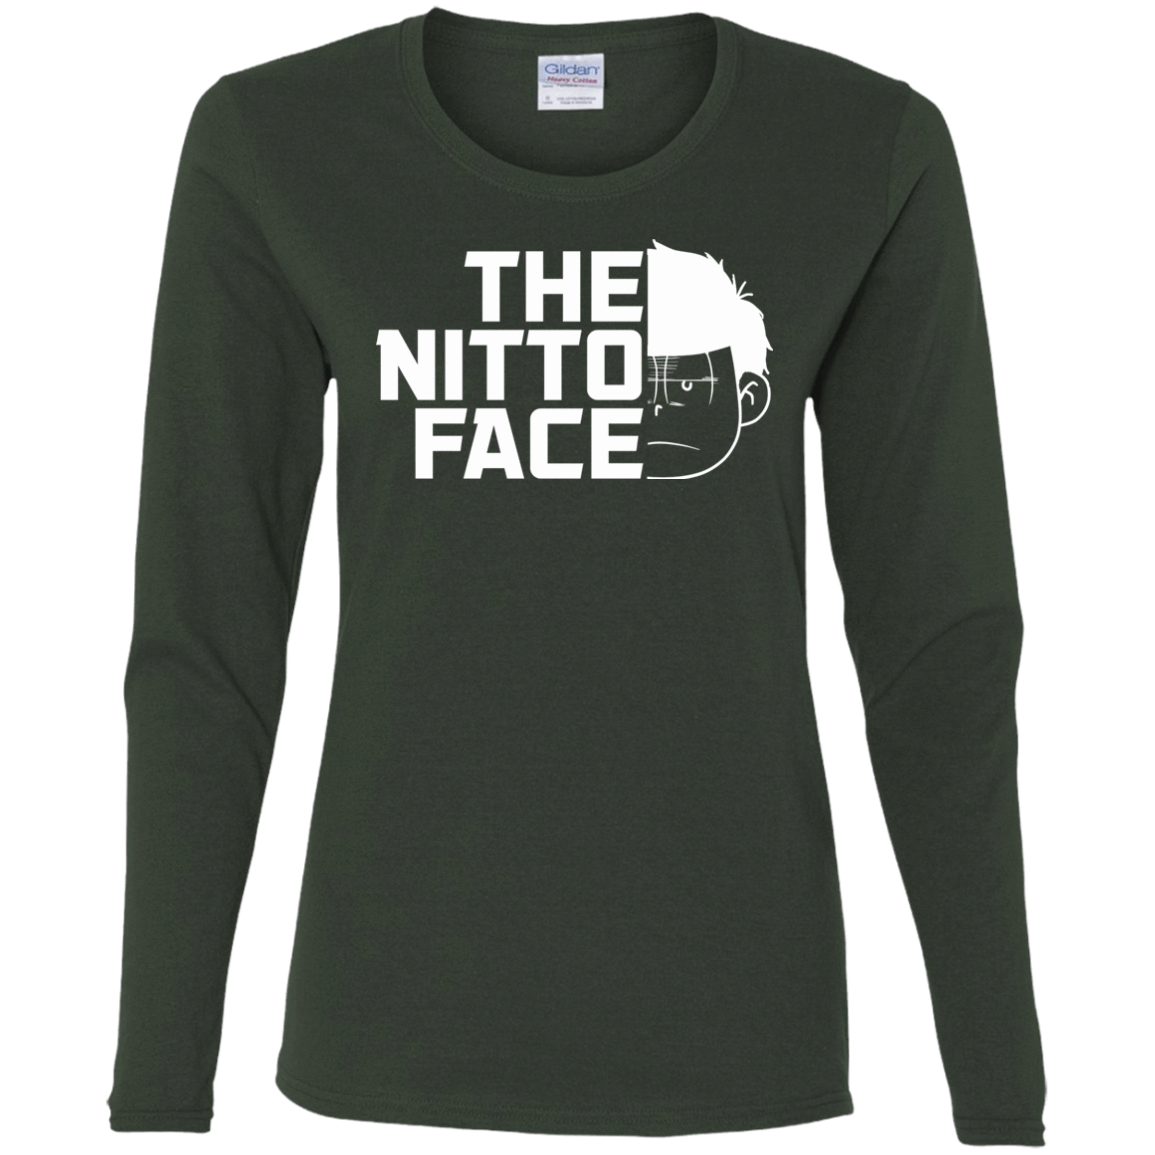 T-Shirts Forest / S The Nitto Face Women's Long Sleeve T-Shirt